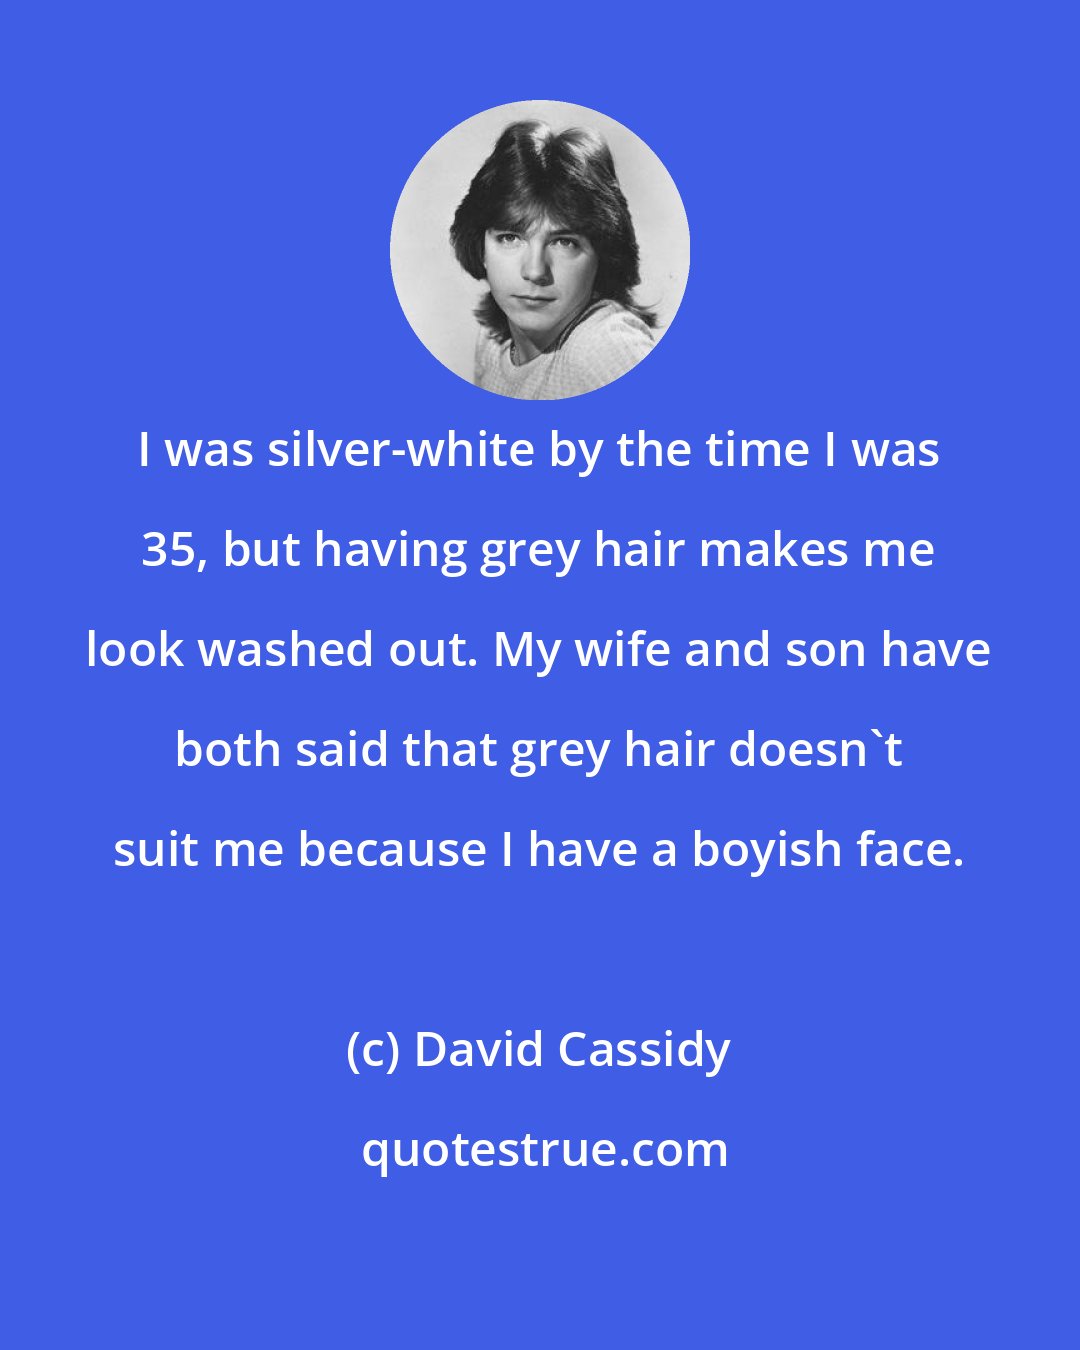 David Cassidy: I was silver-white by the time I was 35, but having grey hair makes me look washed out. My wife and son have both said that grey hair doesn't suit me because I have a boyish face.